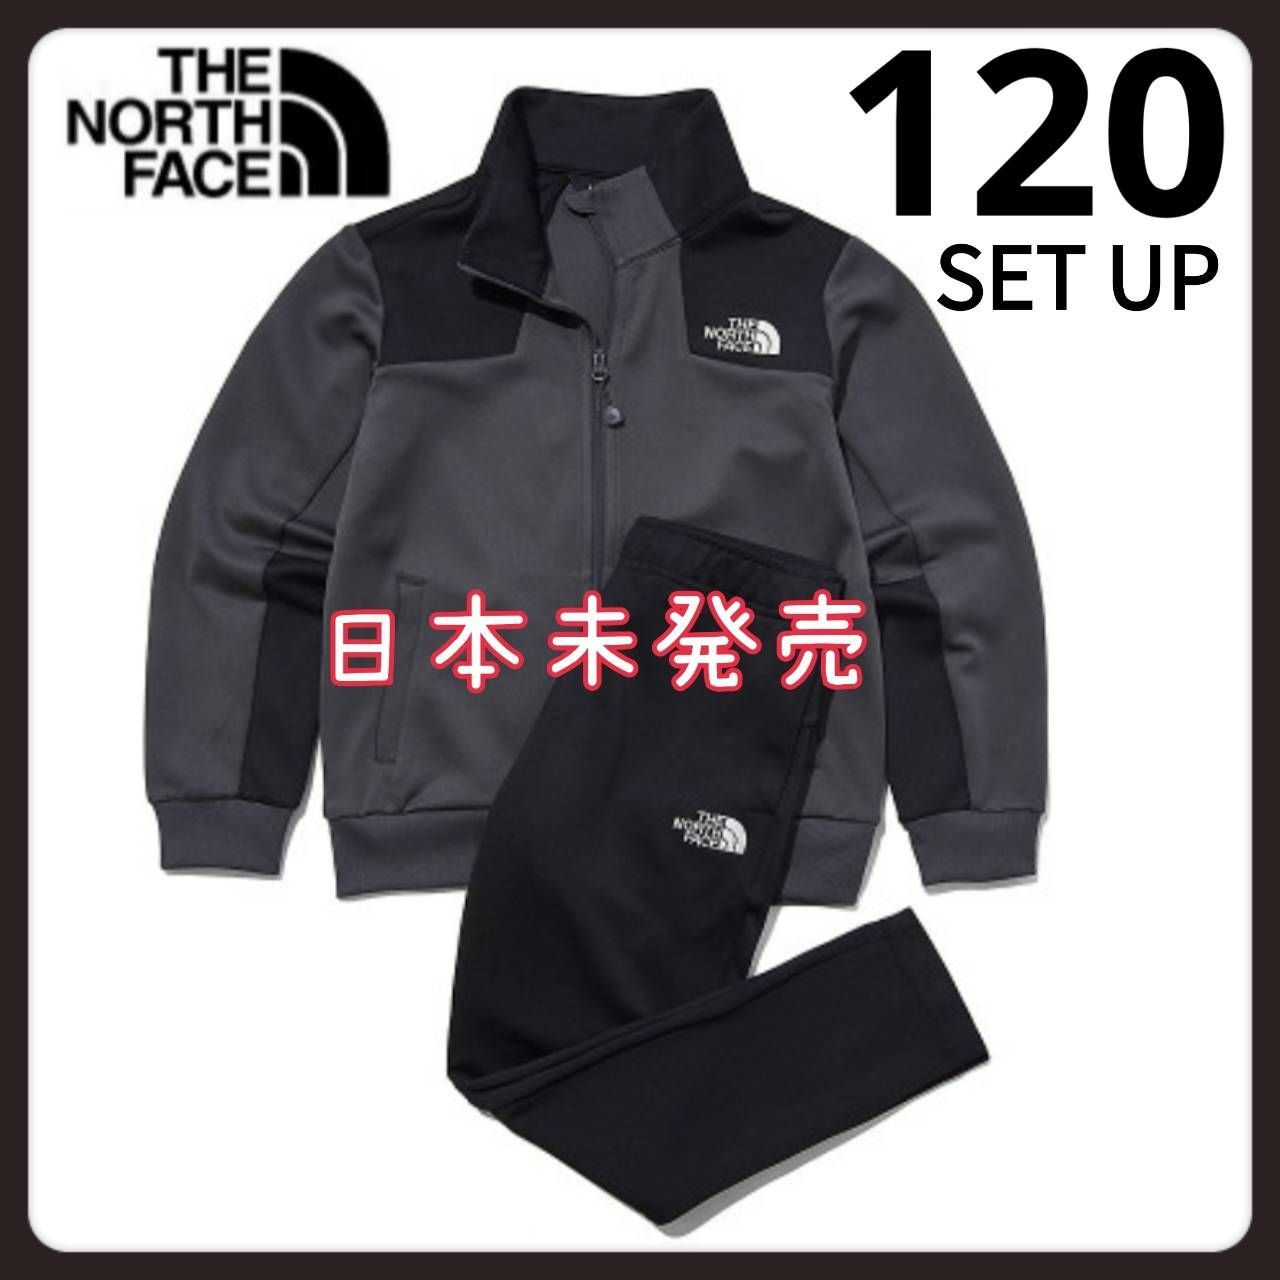 THE NORTH FACEノースフェイスキッズジャージ上下セットアップ120